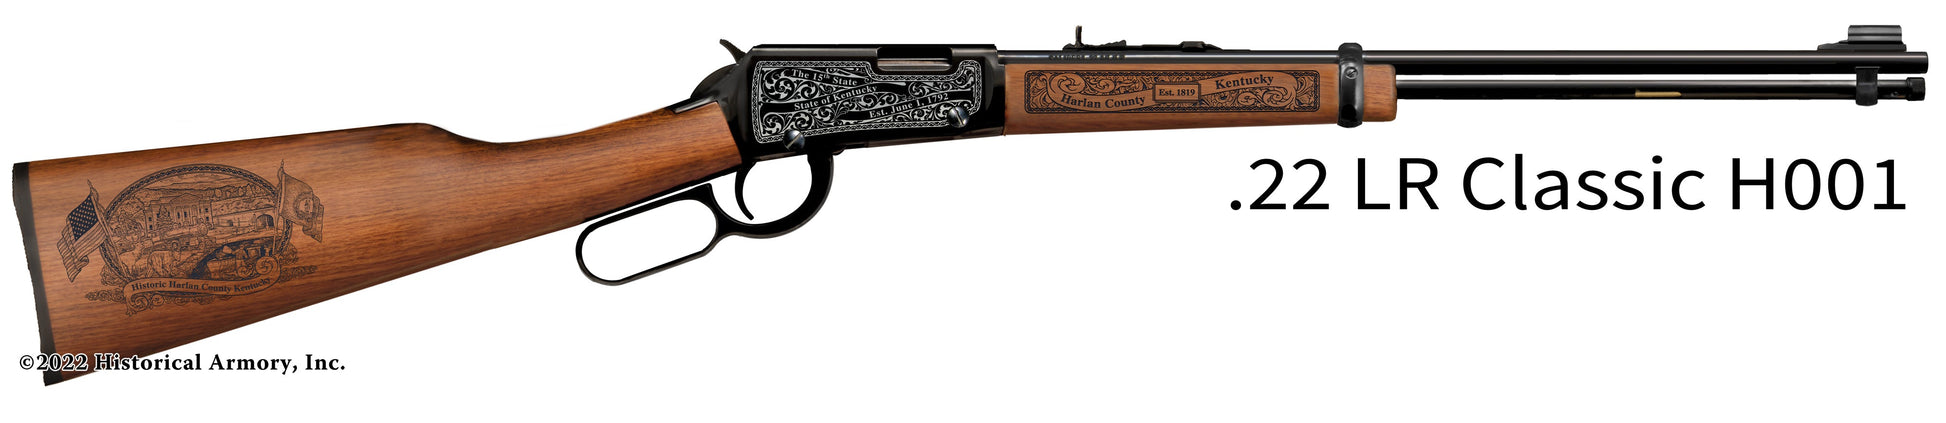 Harlan County Kentucky Engraved Henry H001 Rifle